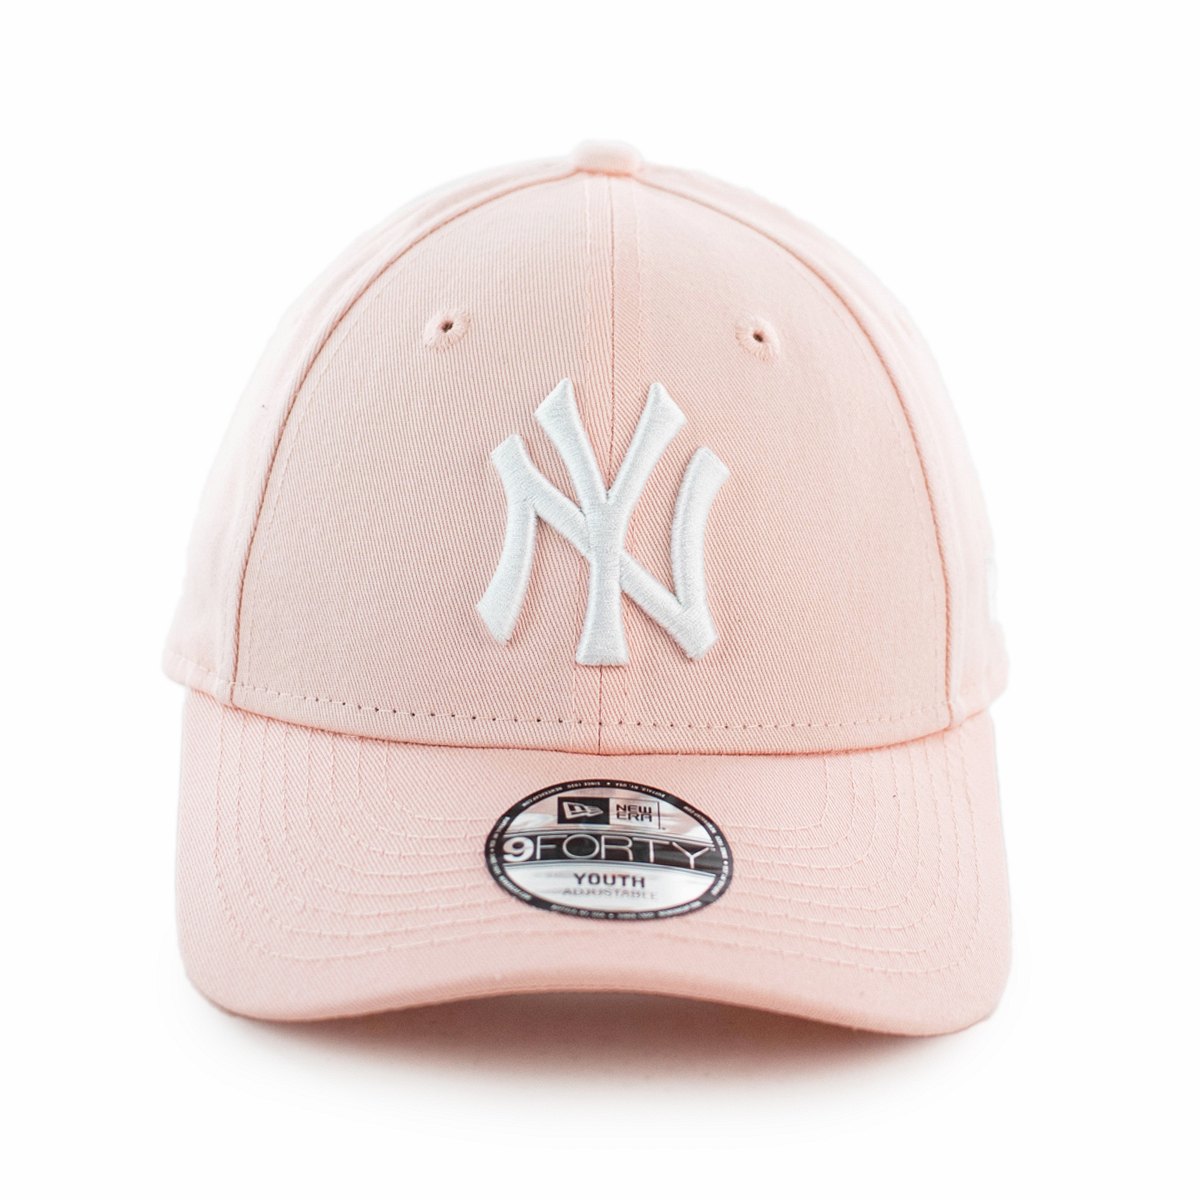 New Era 940 Youth New York Yankees MLB League Essential Cap 12745558Youth-